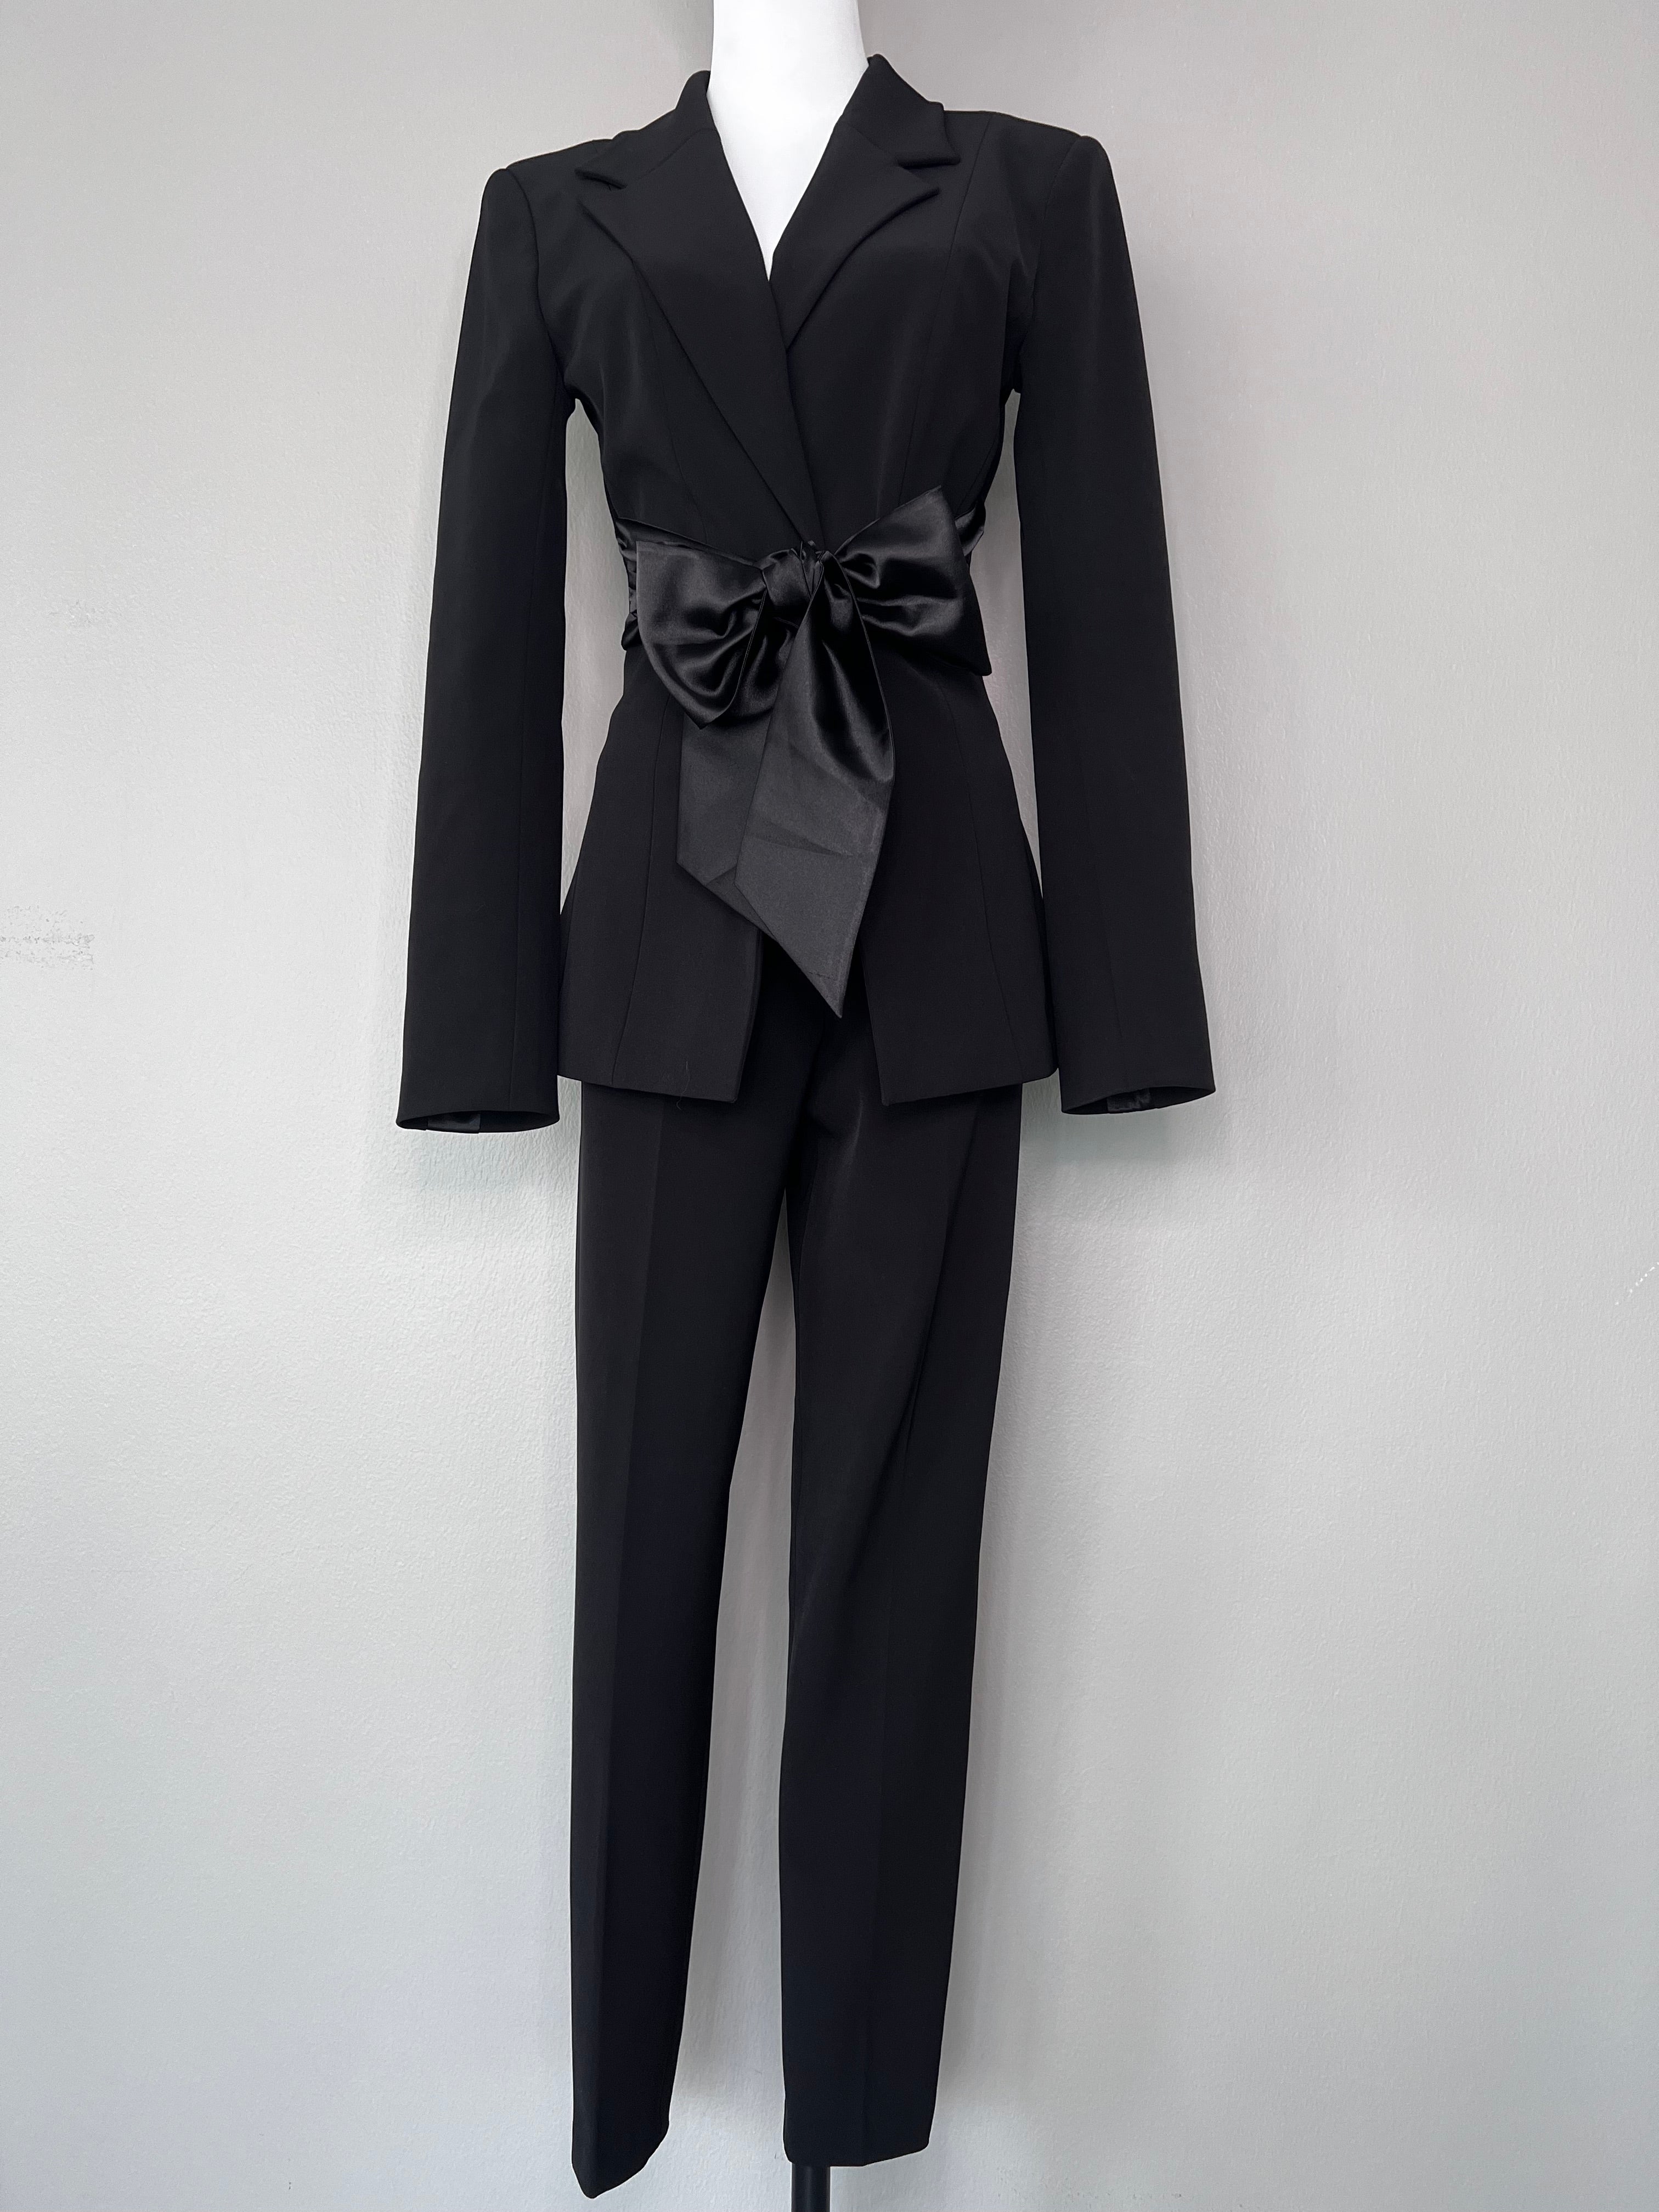 Black suit set with satin bow detail in the middle - GLAMODA